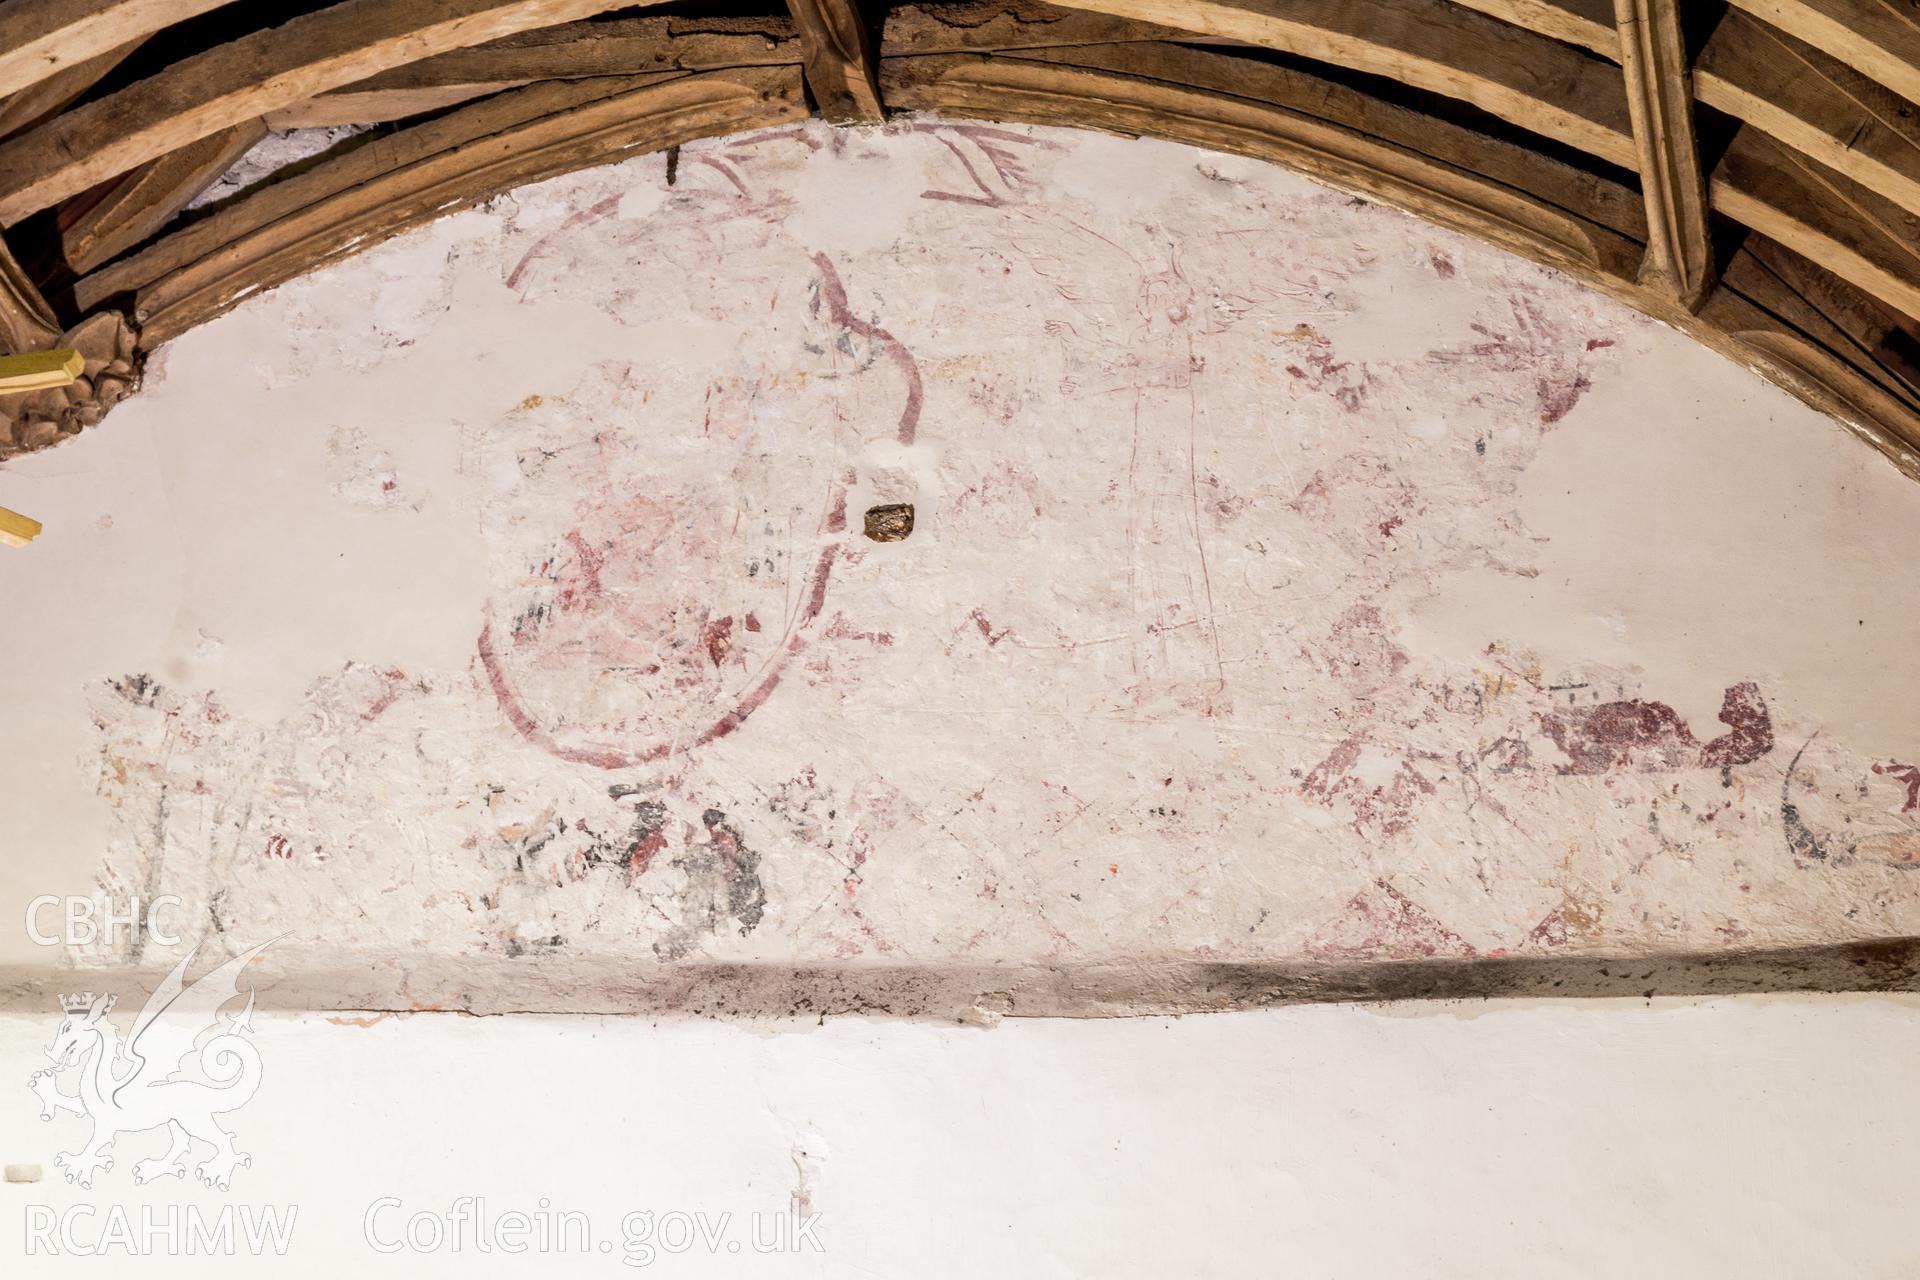 Wallpainting above chancel arch awaiting conservation at St Cadoc’s Church, Llancarfan. RCAHMW photograph by Martin Crampin, 30 April 2021. As published in the RCAHMW volume, 'Temlau Peintiedig: Murluniau a Chroglenni yn Eglwysi Cymru, 1200–1800 / Painted Temples: Wallpaintings and Rood-screens in Welsh Churches, 1200–1800'. Figure 4.5b, page 153.